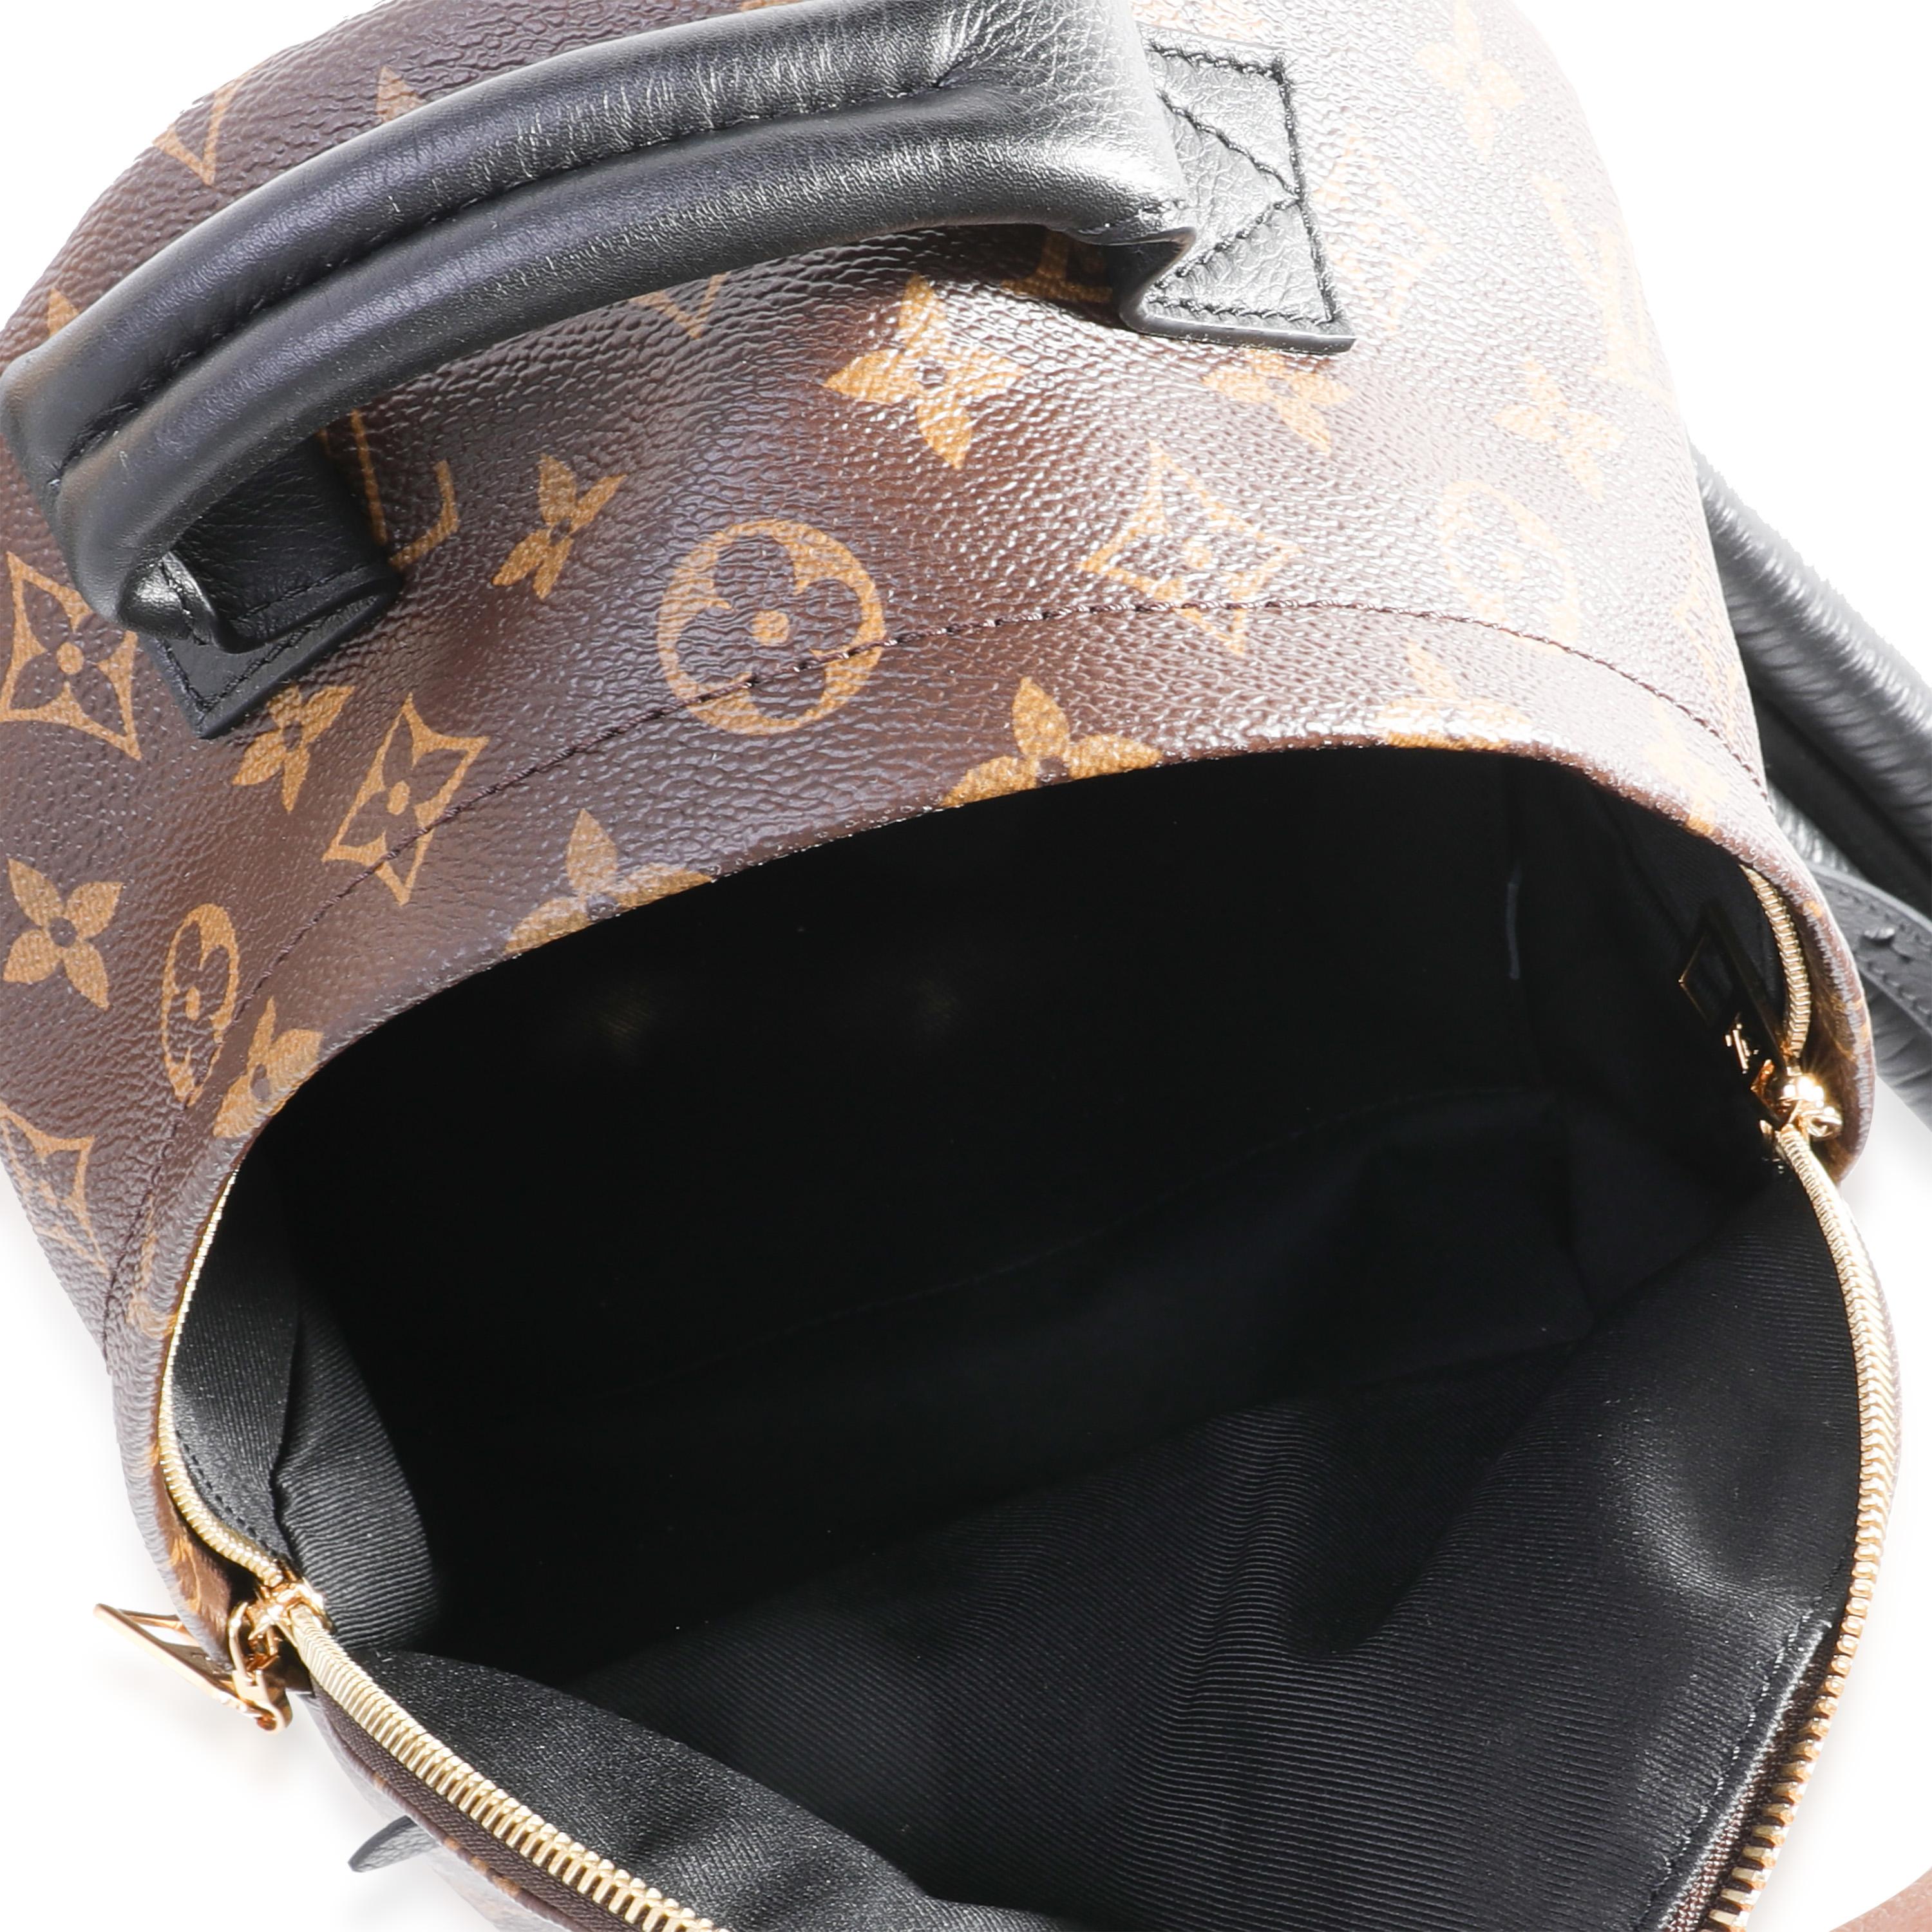 Listing Title: Louis Vuitton Monogram & Monogram Reverse Canvas Palm Springs PM Backpack
SKU: 118510
MSRP: 2570.00
Condition: Pre-owned (3000)
Handbag Condition: Very Good
Condition Comments: Very Good Condition. Signs of wear to the straps.